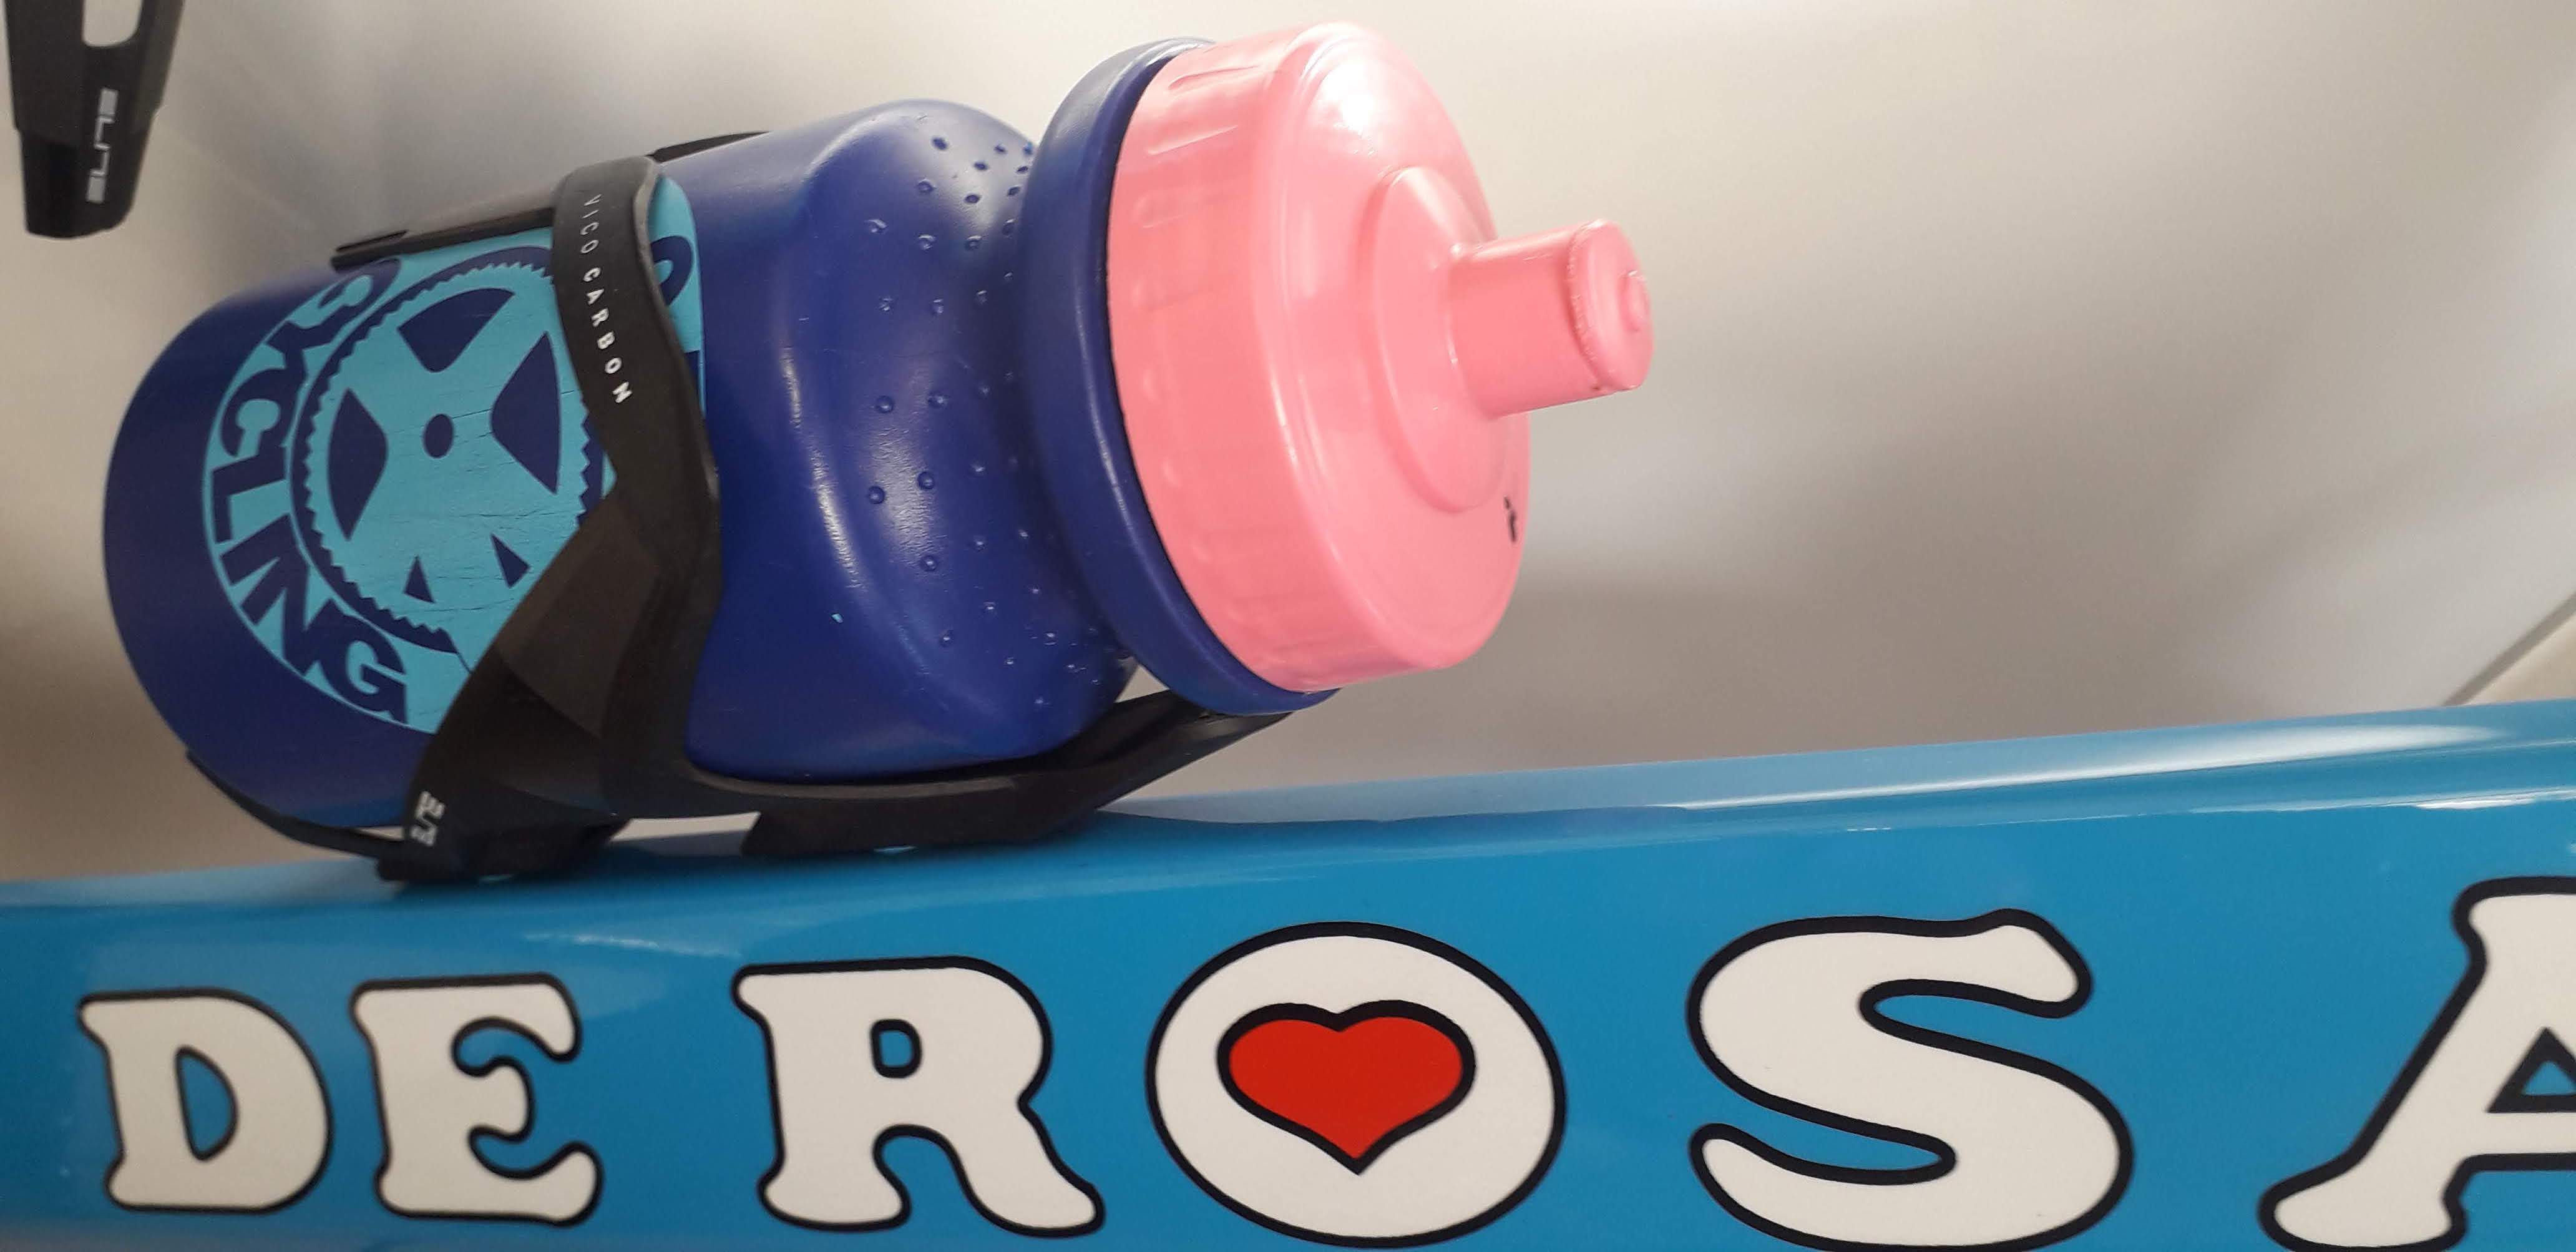 CPT Cycling hydration bottle mounted on a De Rosa road cycling frame.